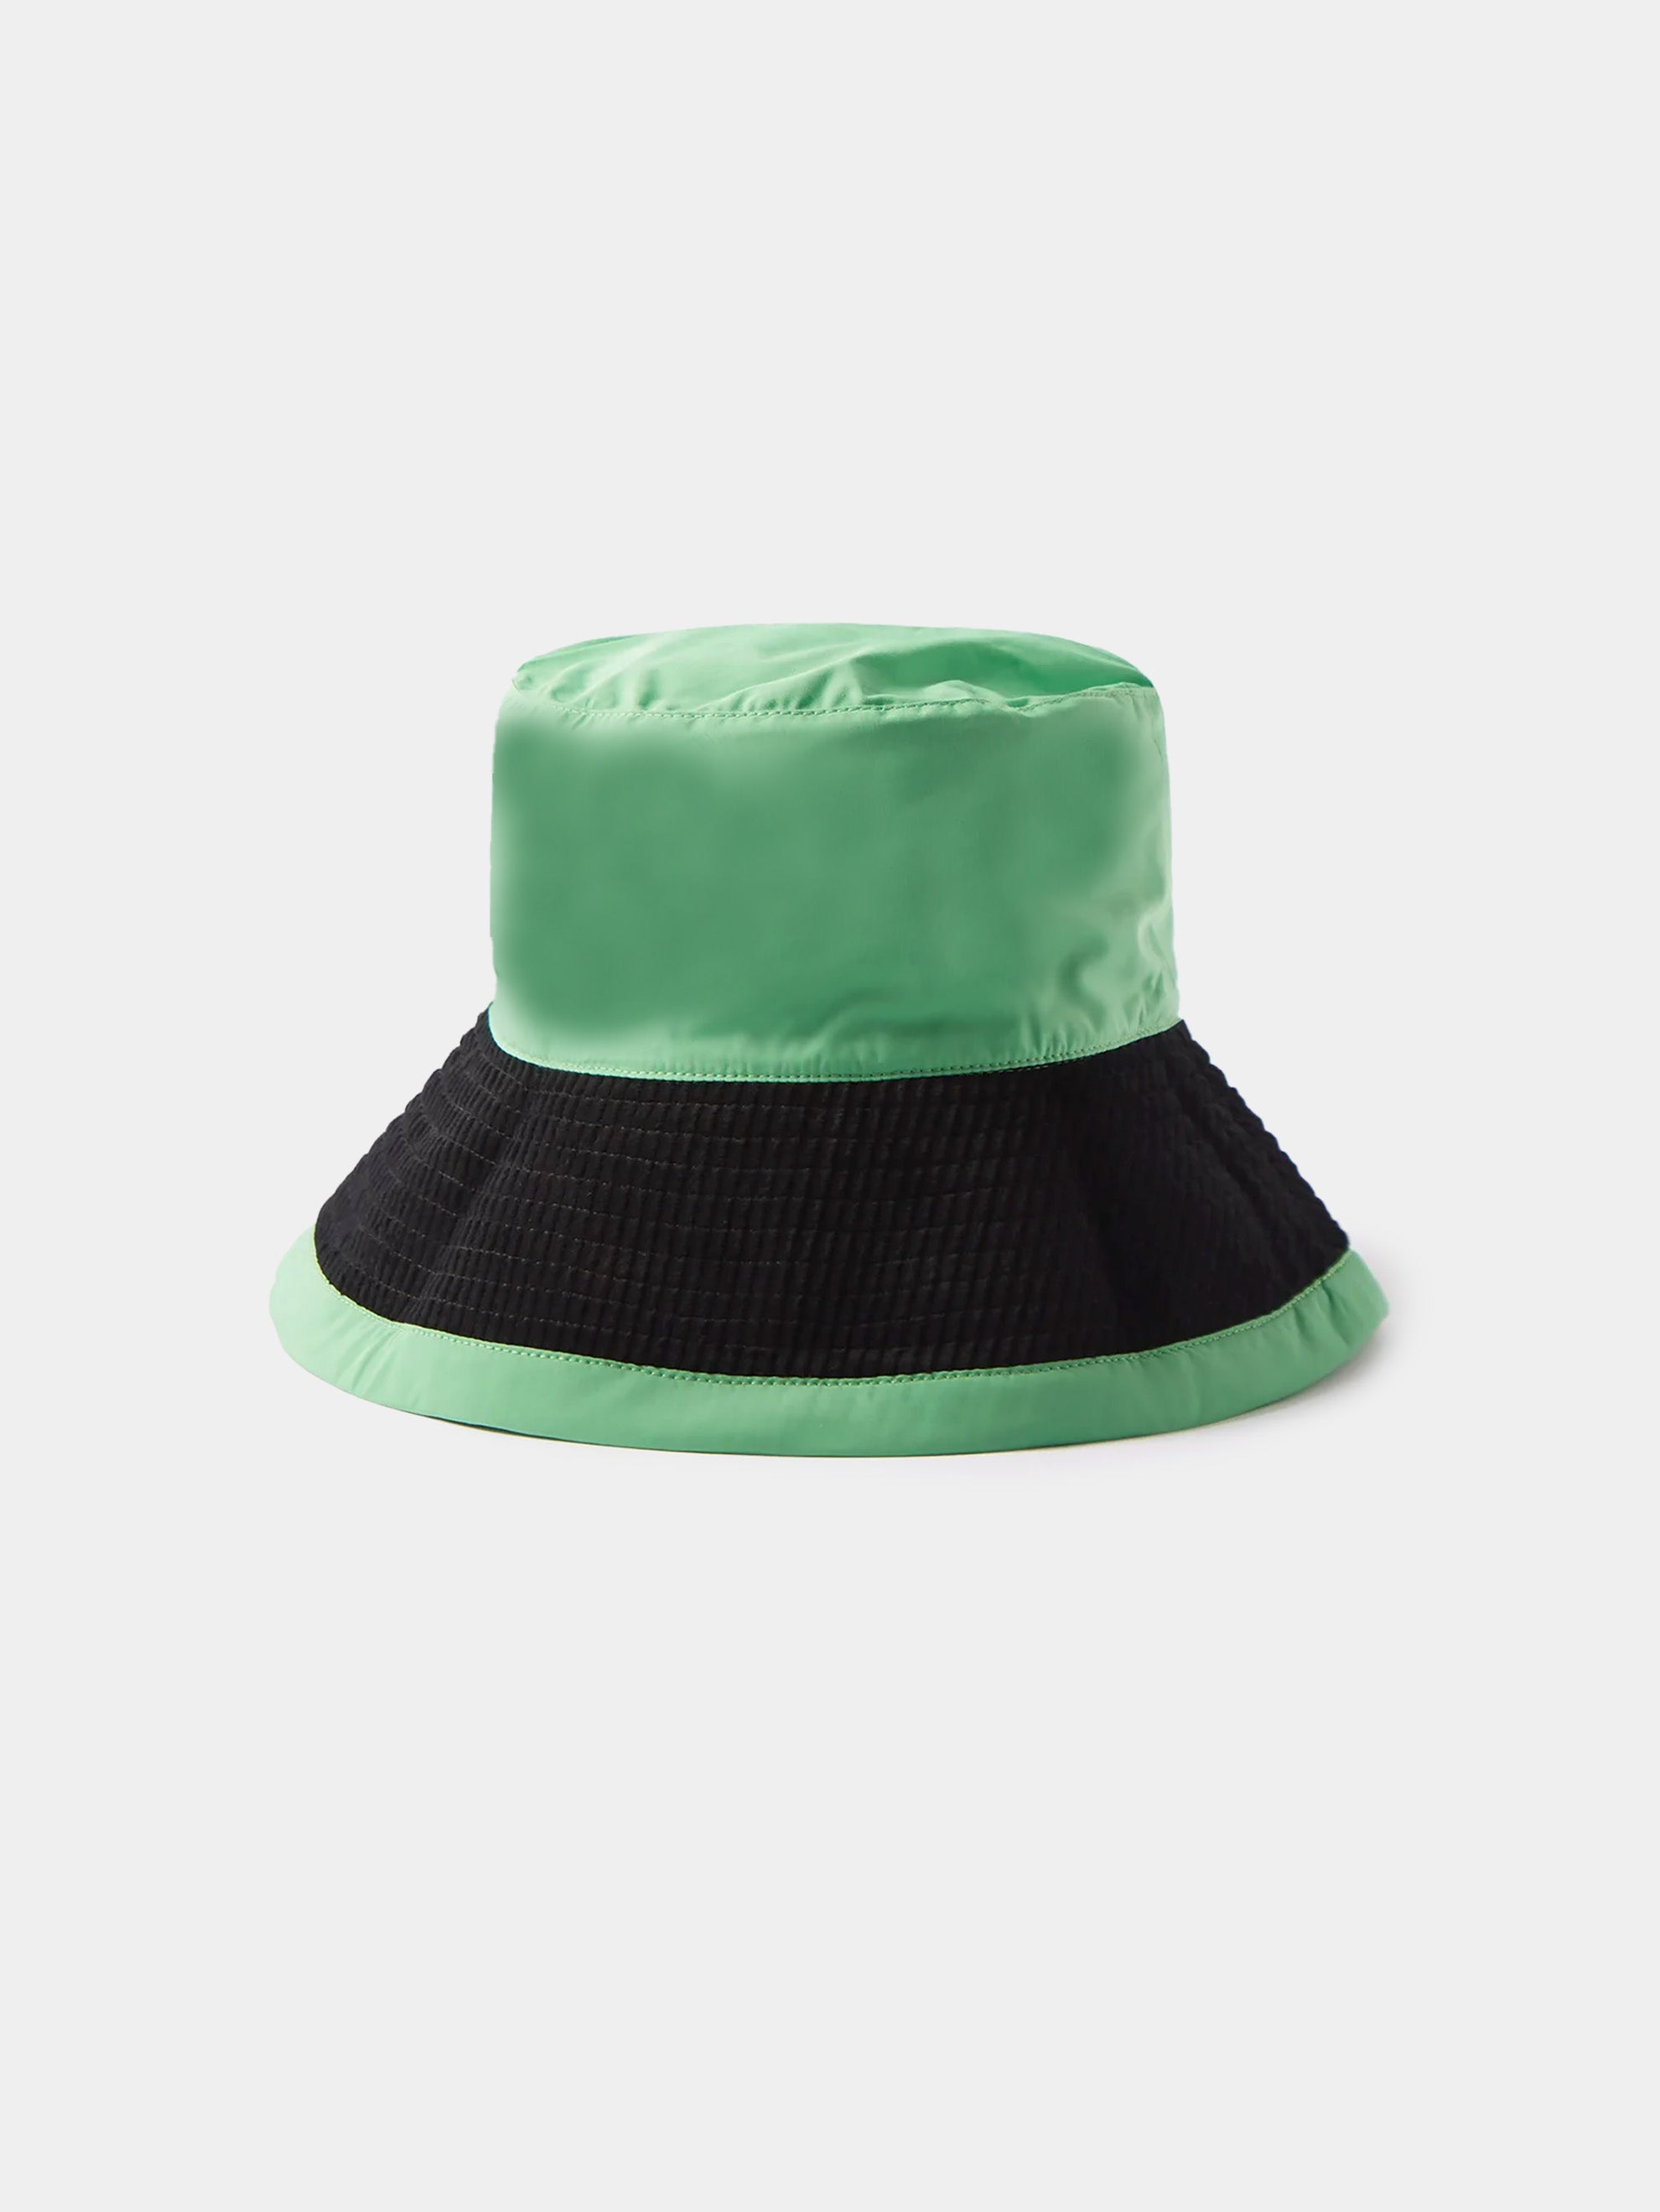 Cult of Individuality Bucket Hat in Cherry Blossom - Green - One Size